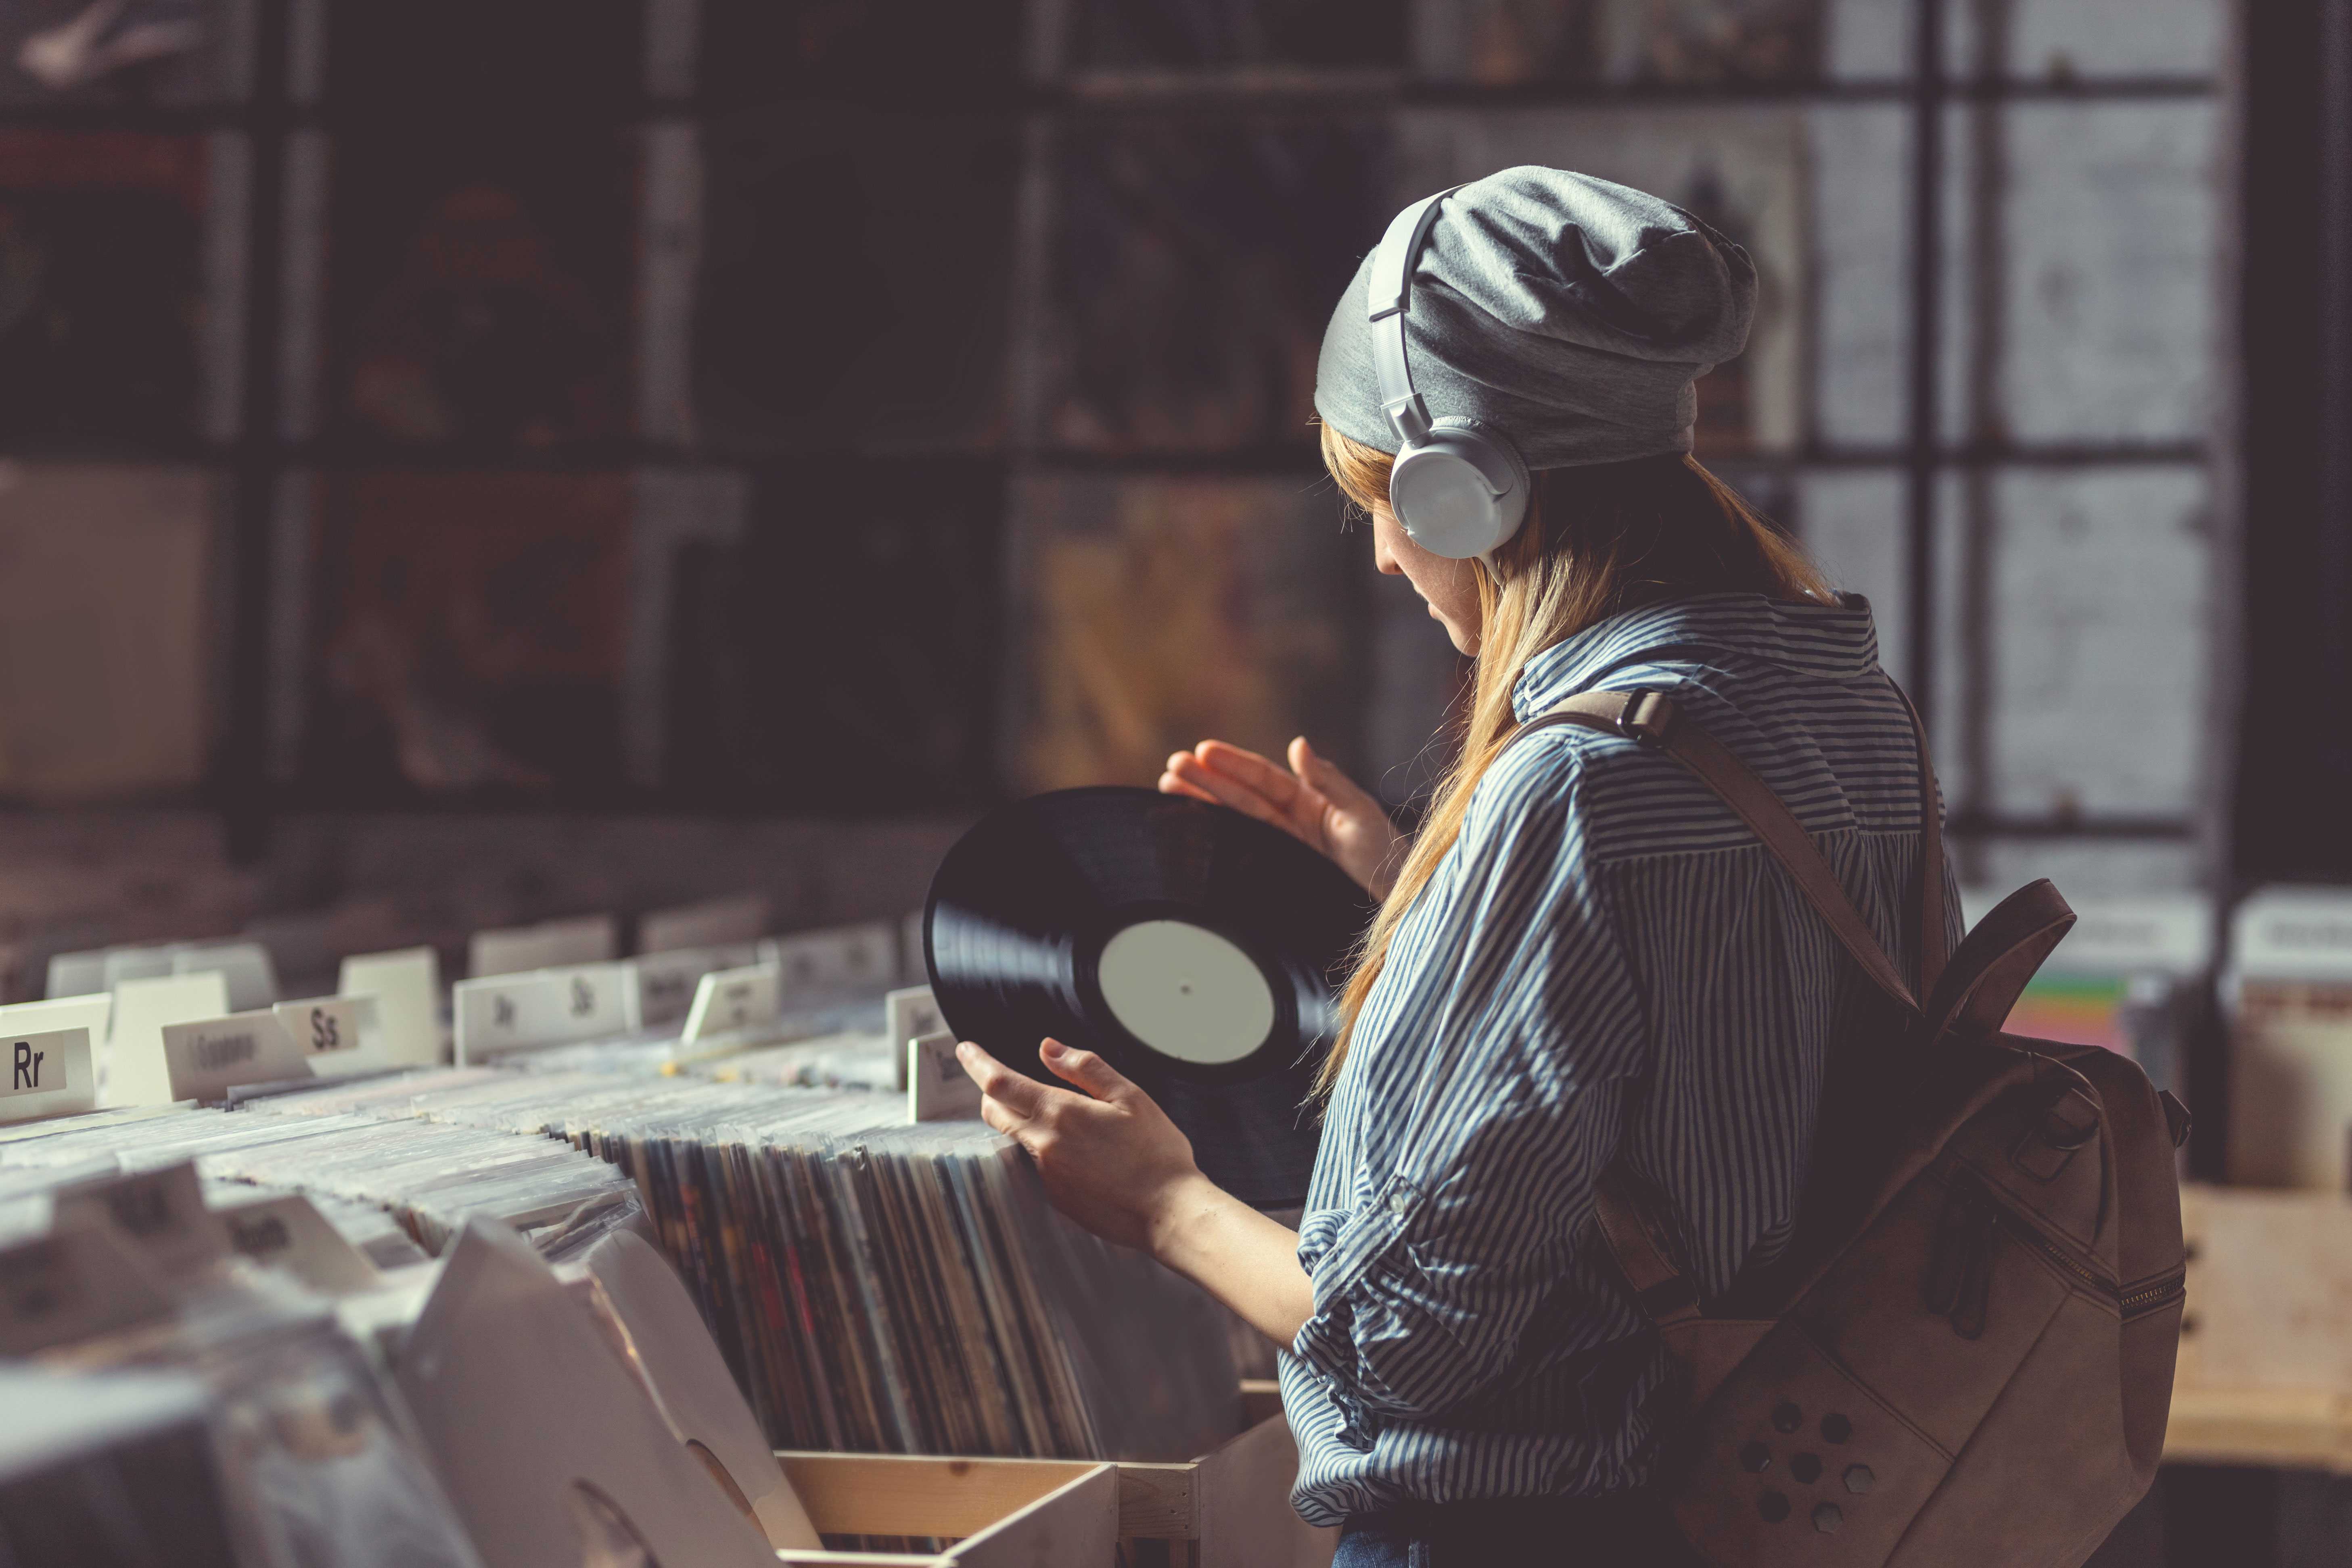 Vinyl record sales have seen a resurgence in recent years